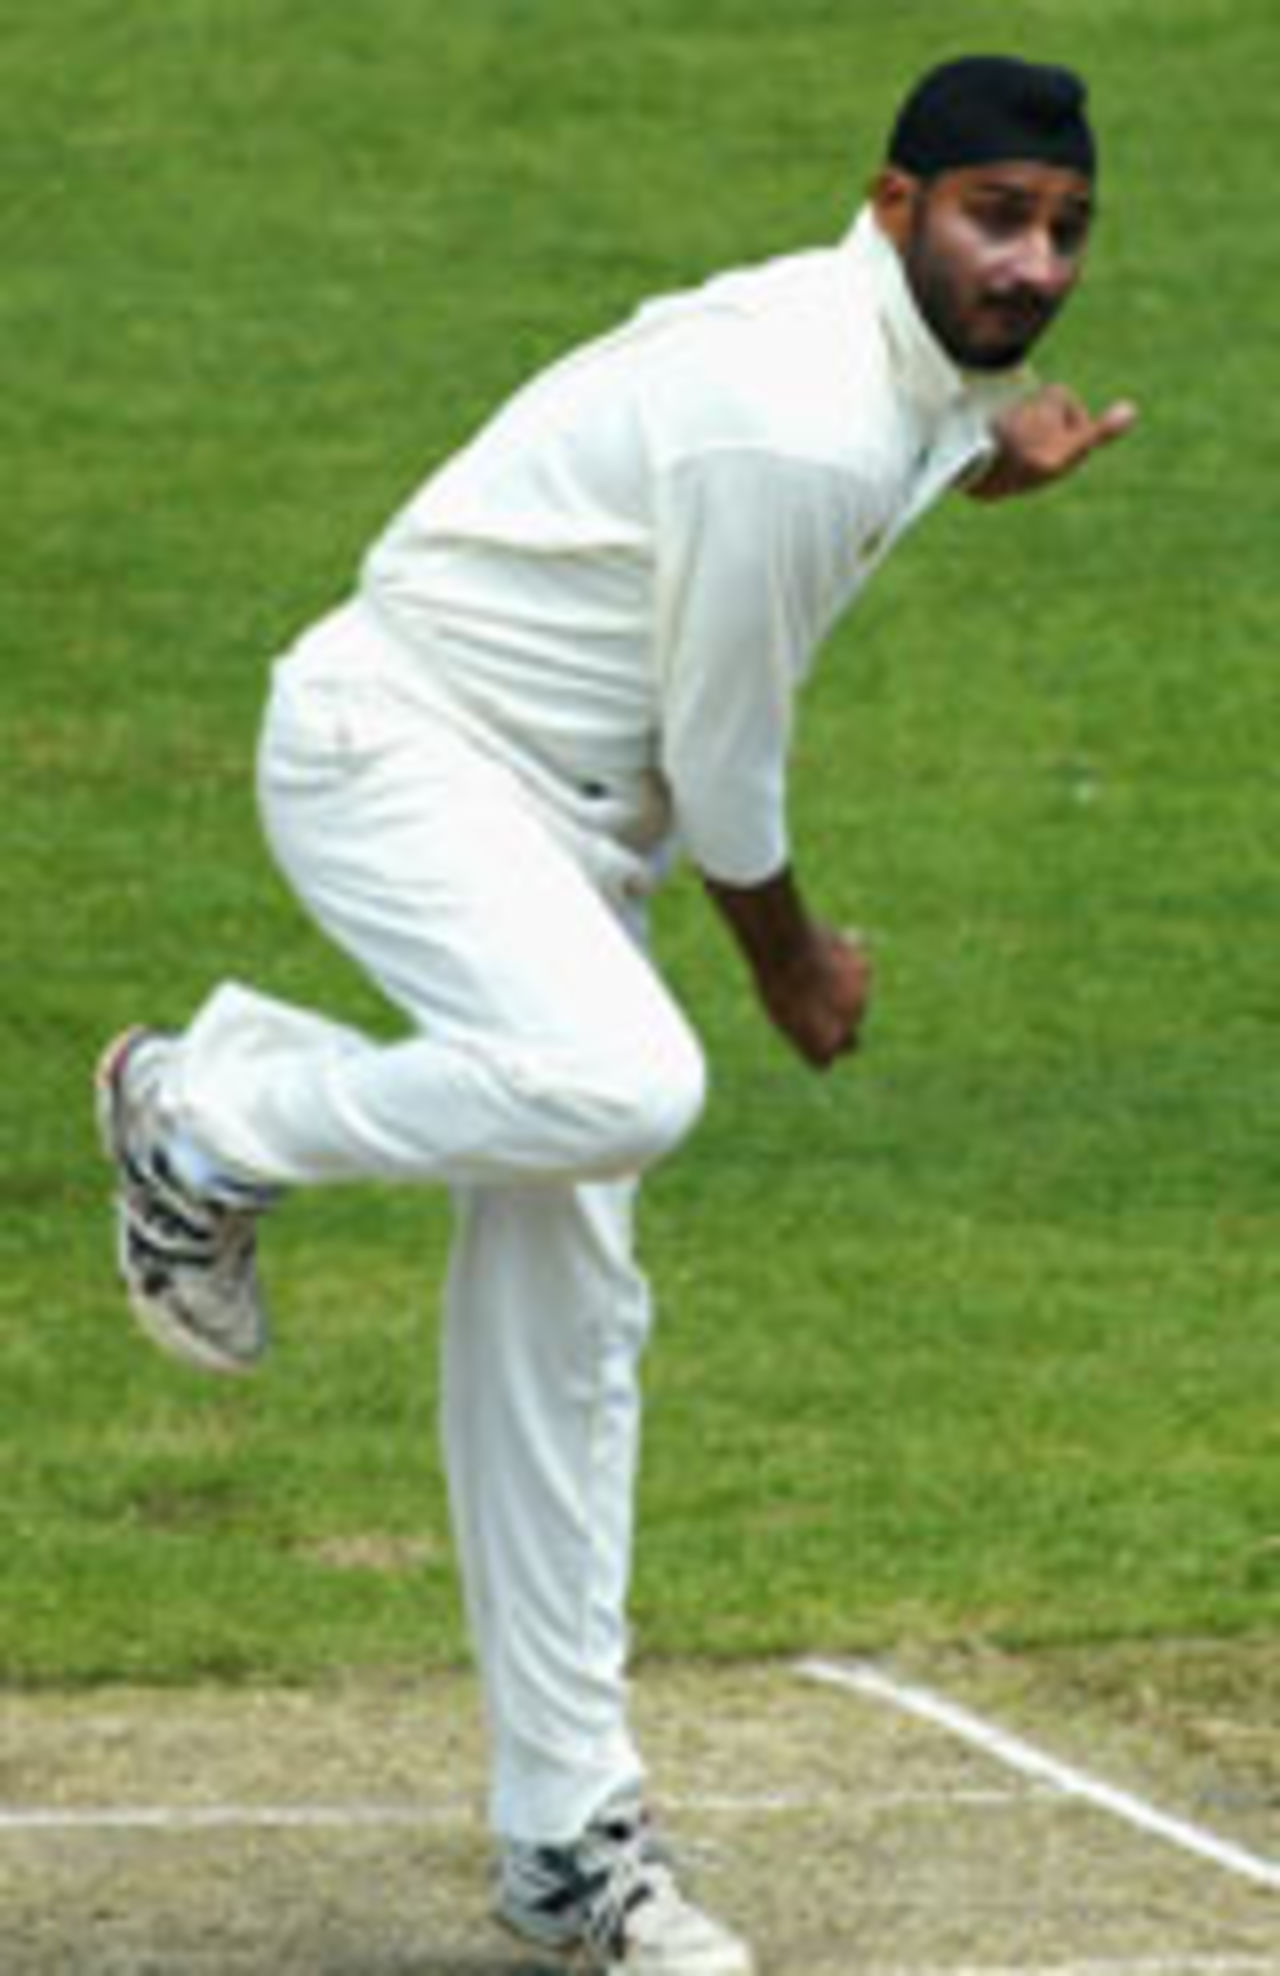 Harbhajan Singh in action in India's warm-up match against Victoria, Victoria v Indians, Melbourne, 2nd day, November 26, 2003